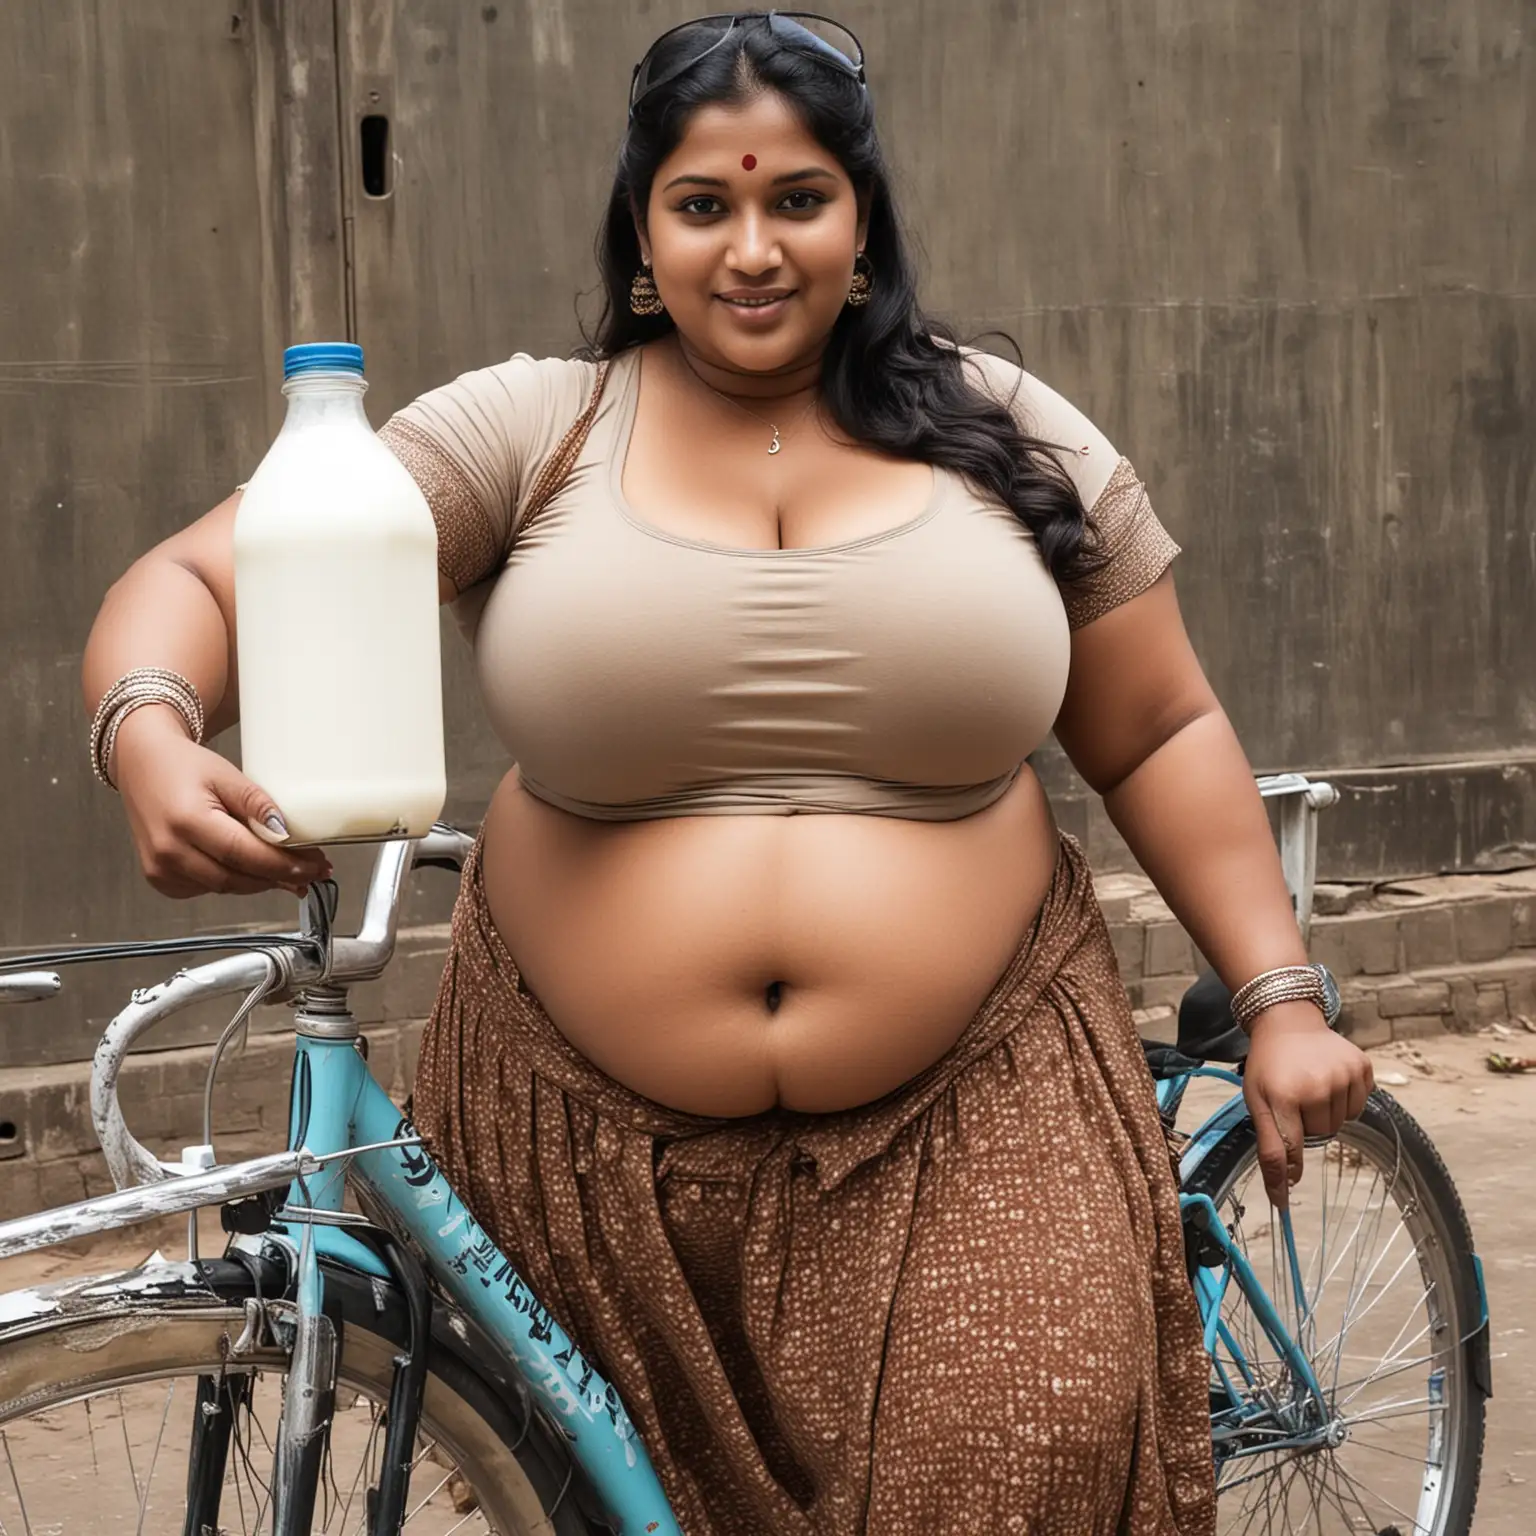 Curvaceous Indian Milk Delivery Woman on Bicycle